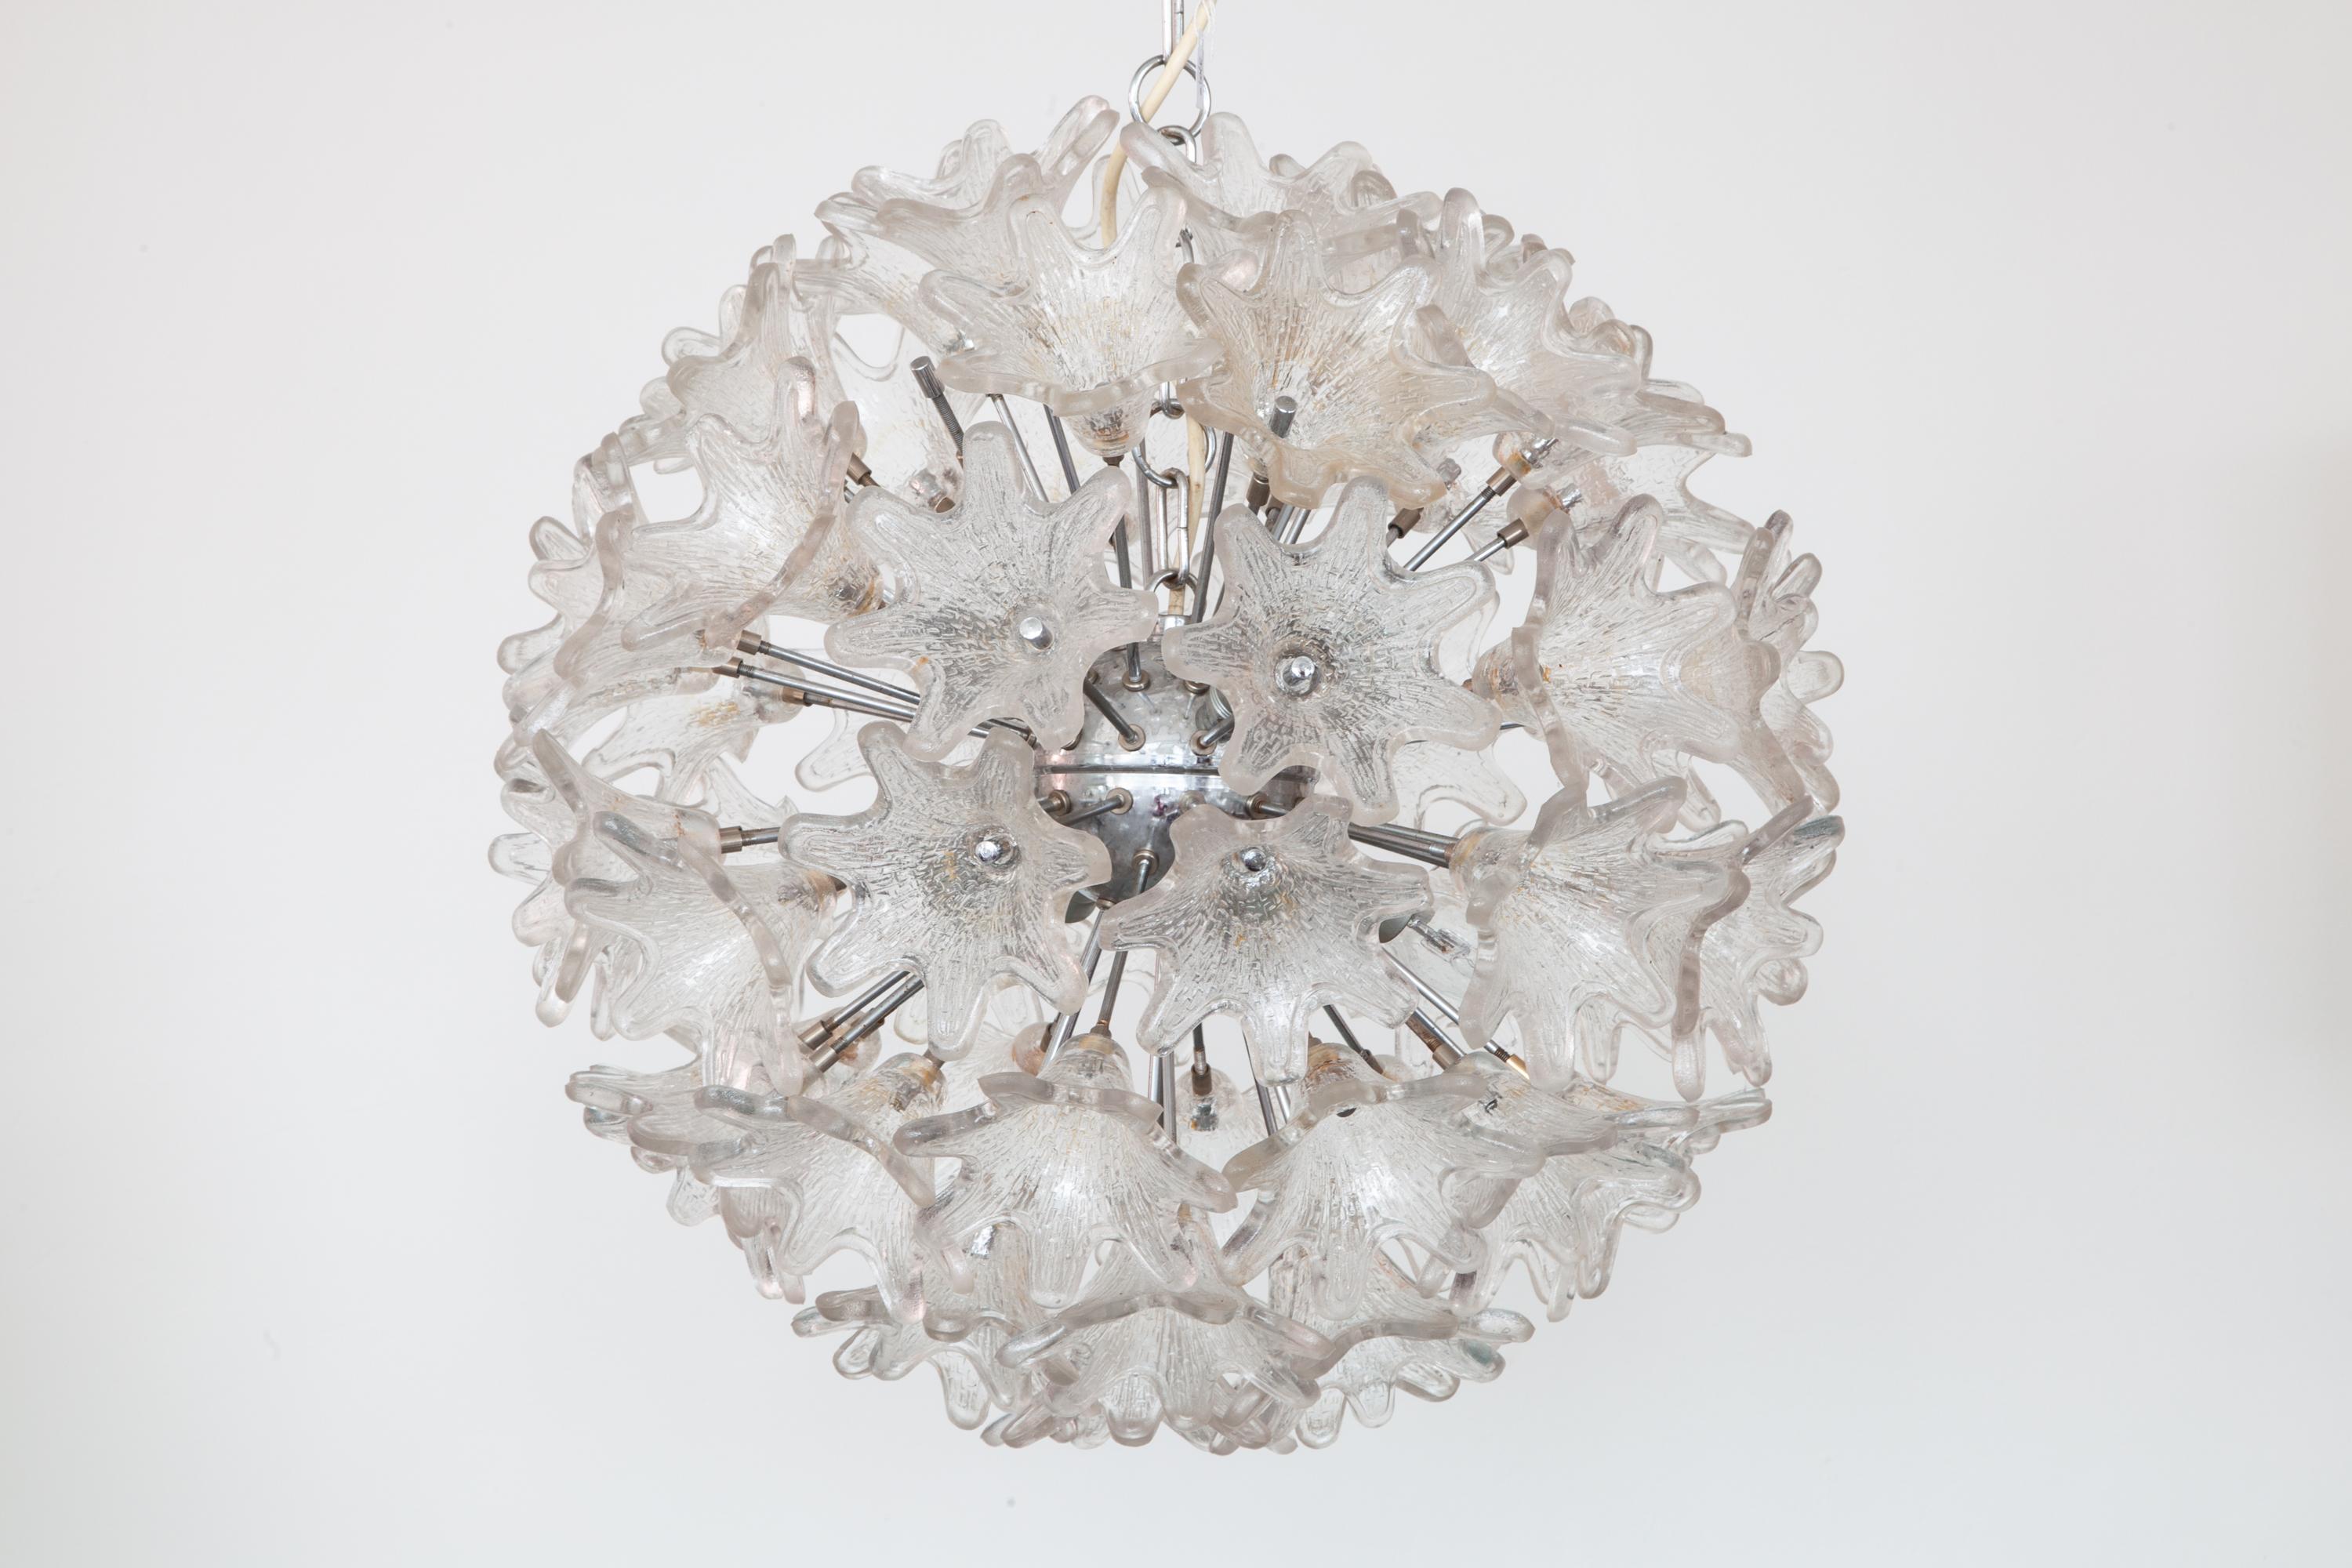 A 1960s Sputnik by Paolo Venini for VeArt Italian Murano glass flowers shaped chandelier, with chrome frame, and covered in molded ice structure glass flowers.
A beautiful clear natural look like a jewel in your living room. In good original